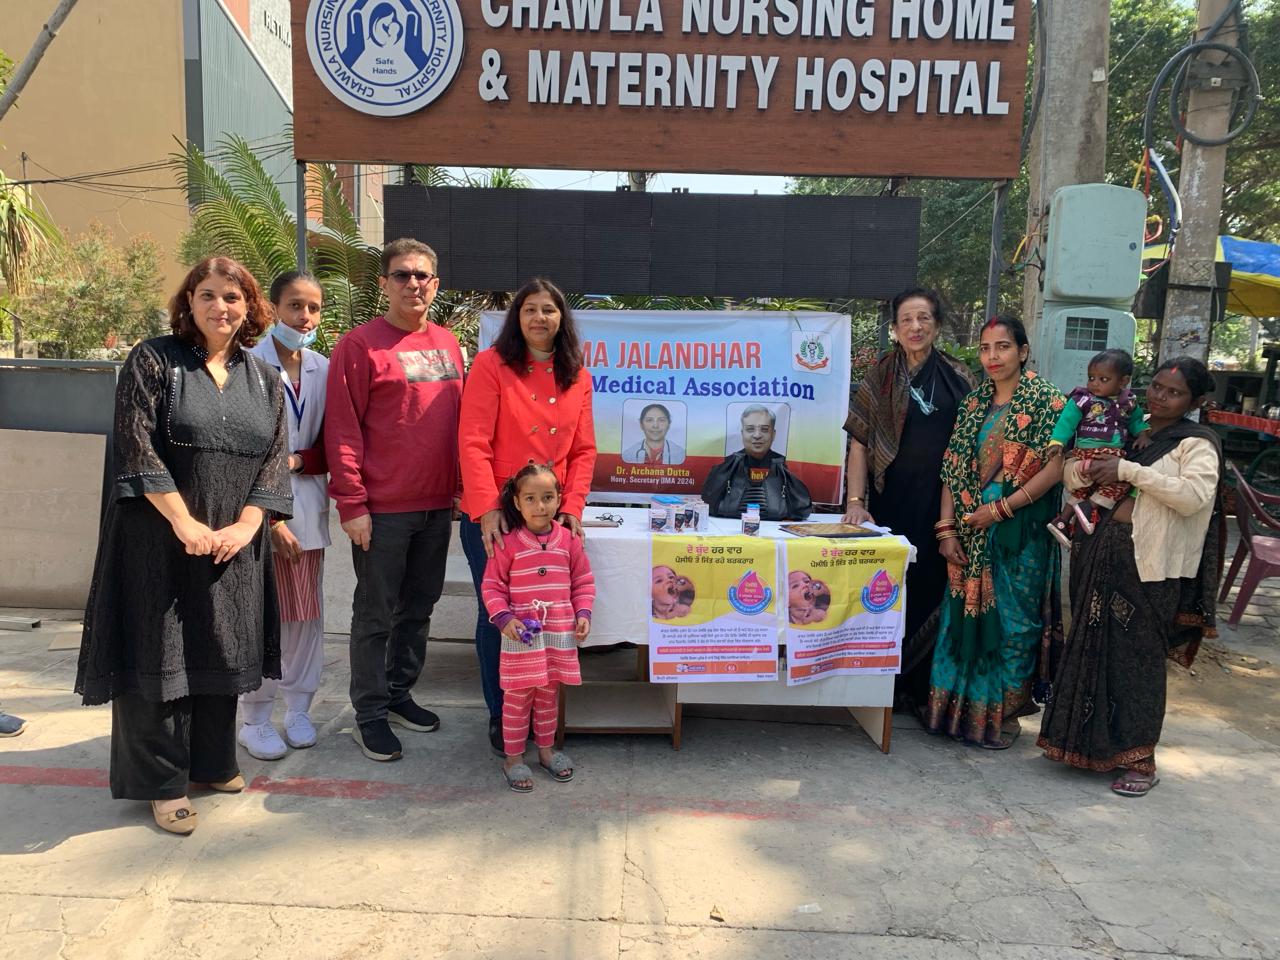 Celebrated Puls Polio Day at Chawla Nursing Home and Maternity Hospital with association of Indian Medical Association Jalandhar